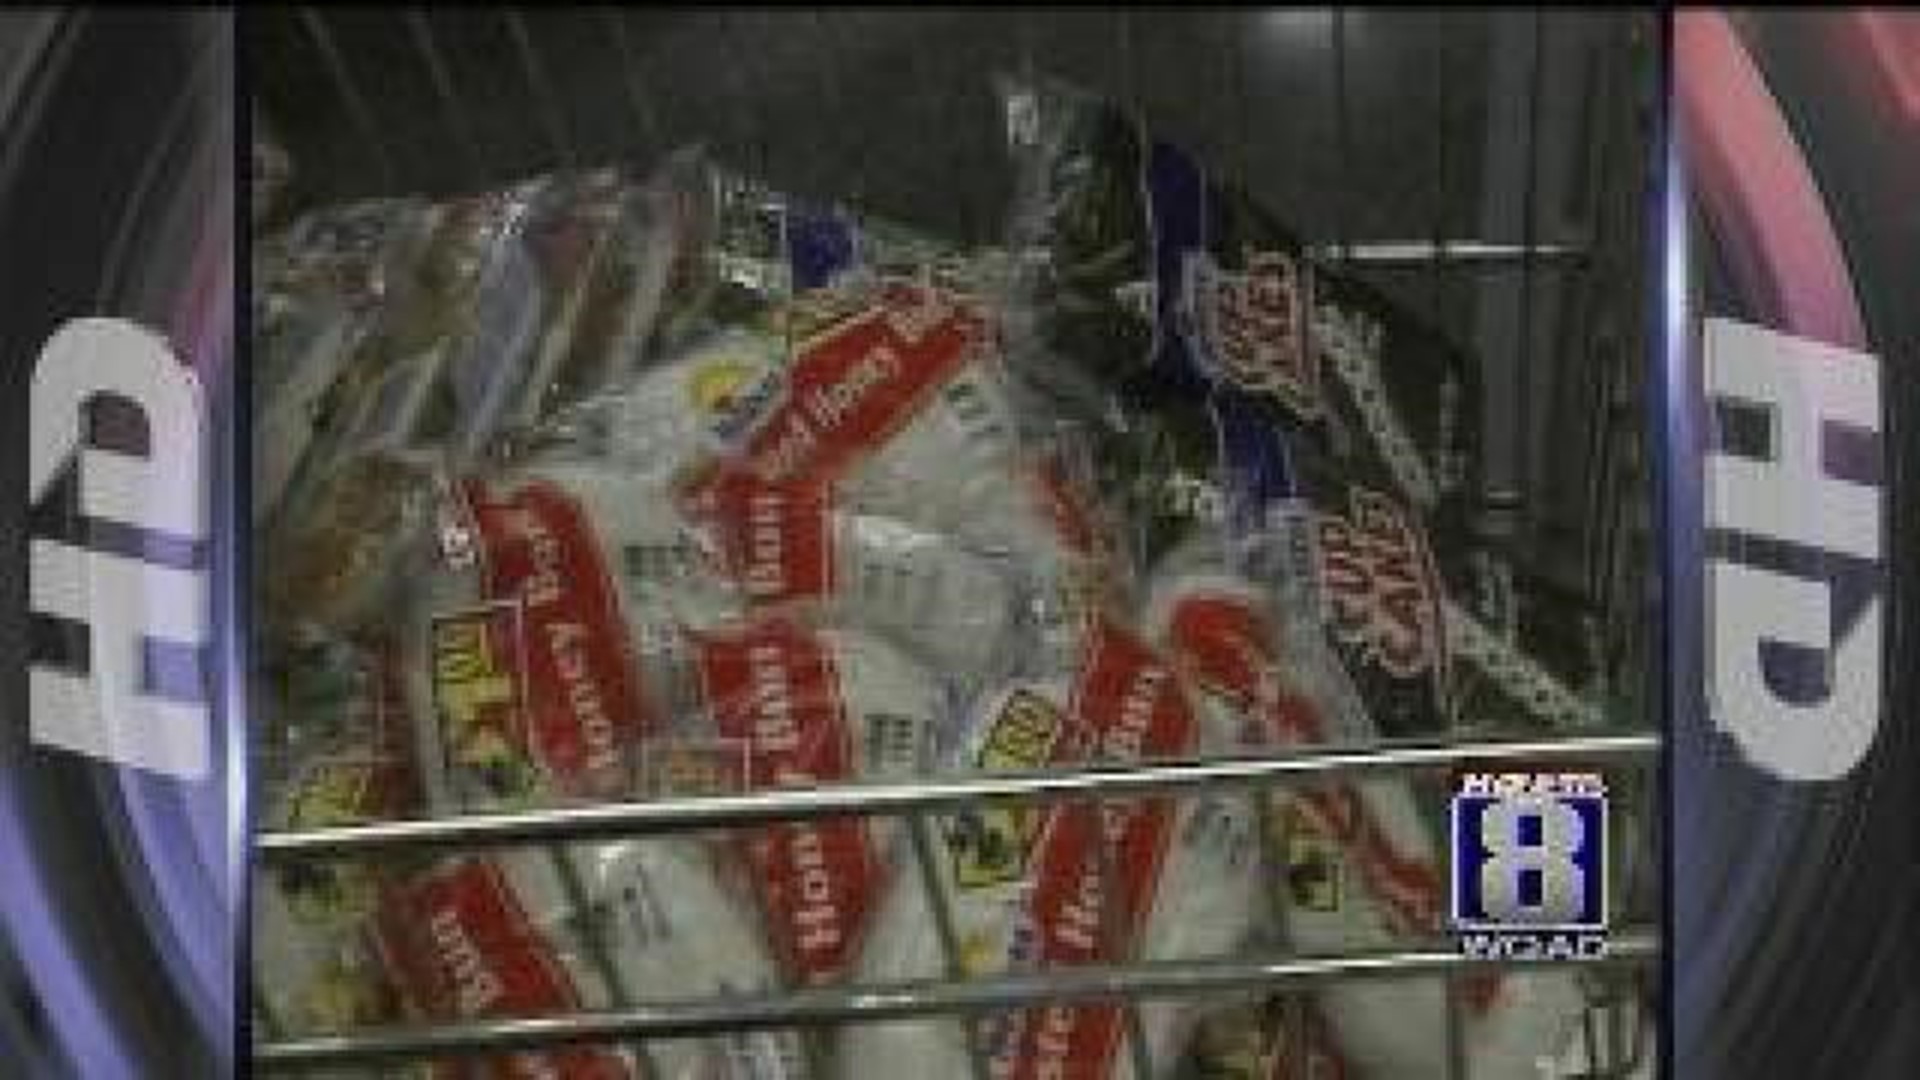 Hostess wants out of union contract